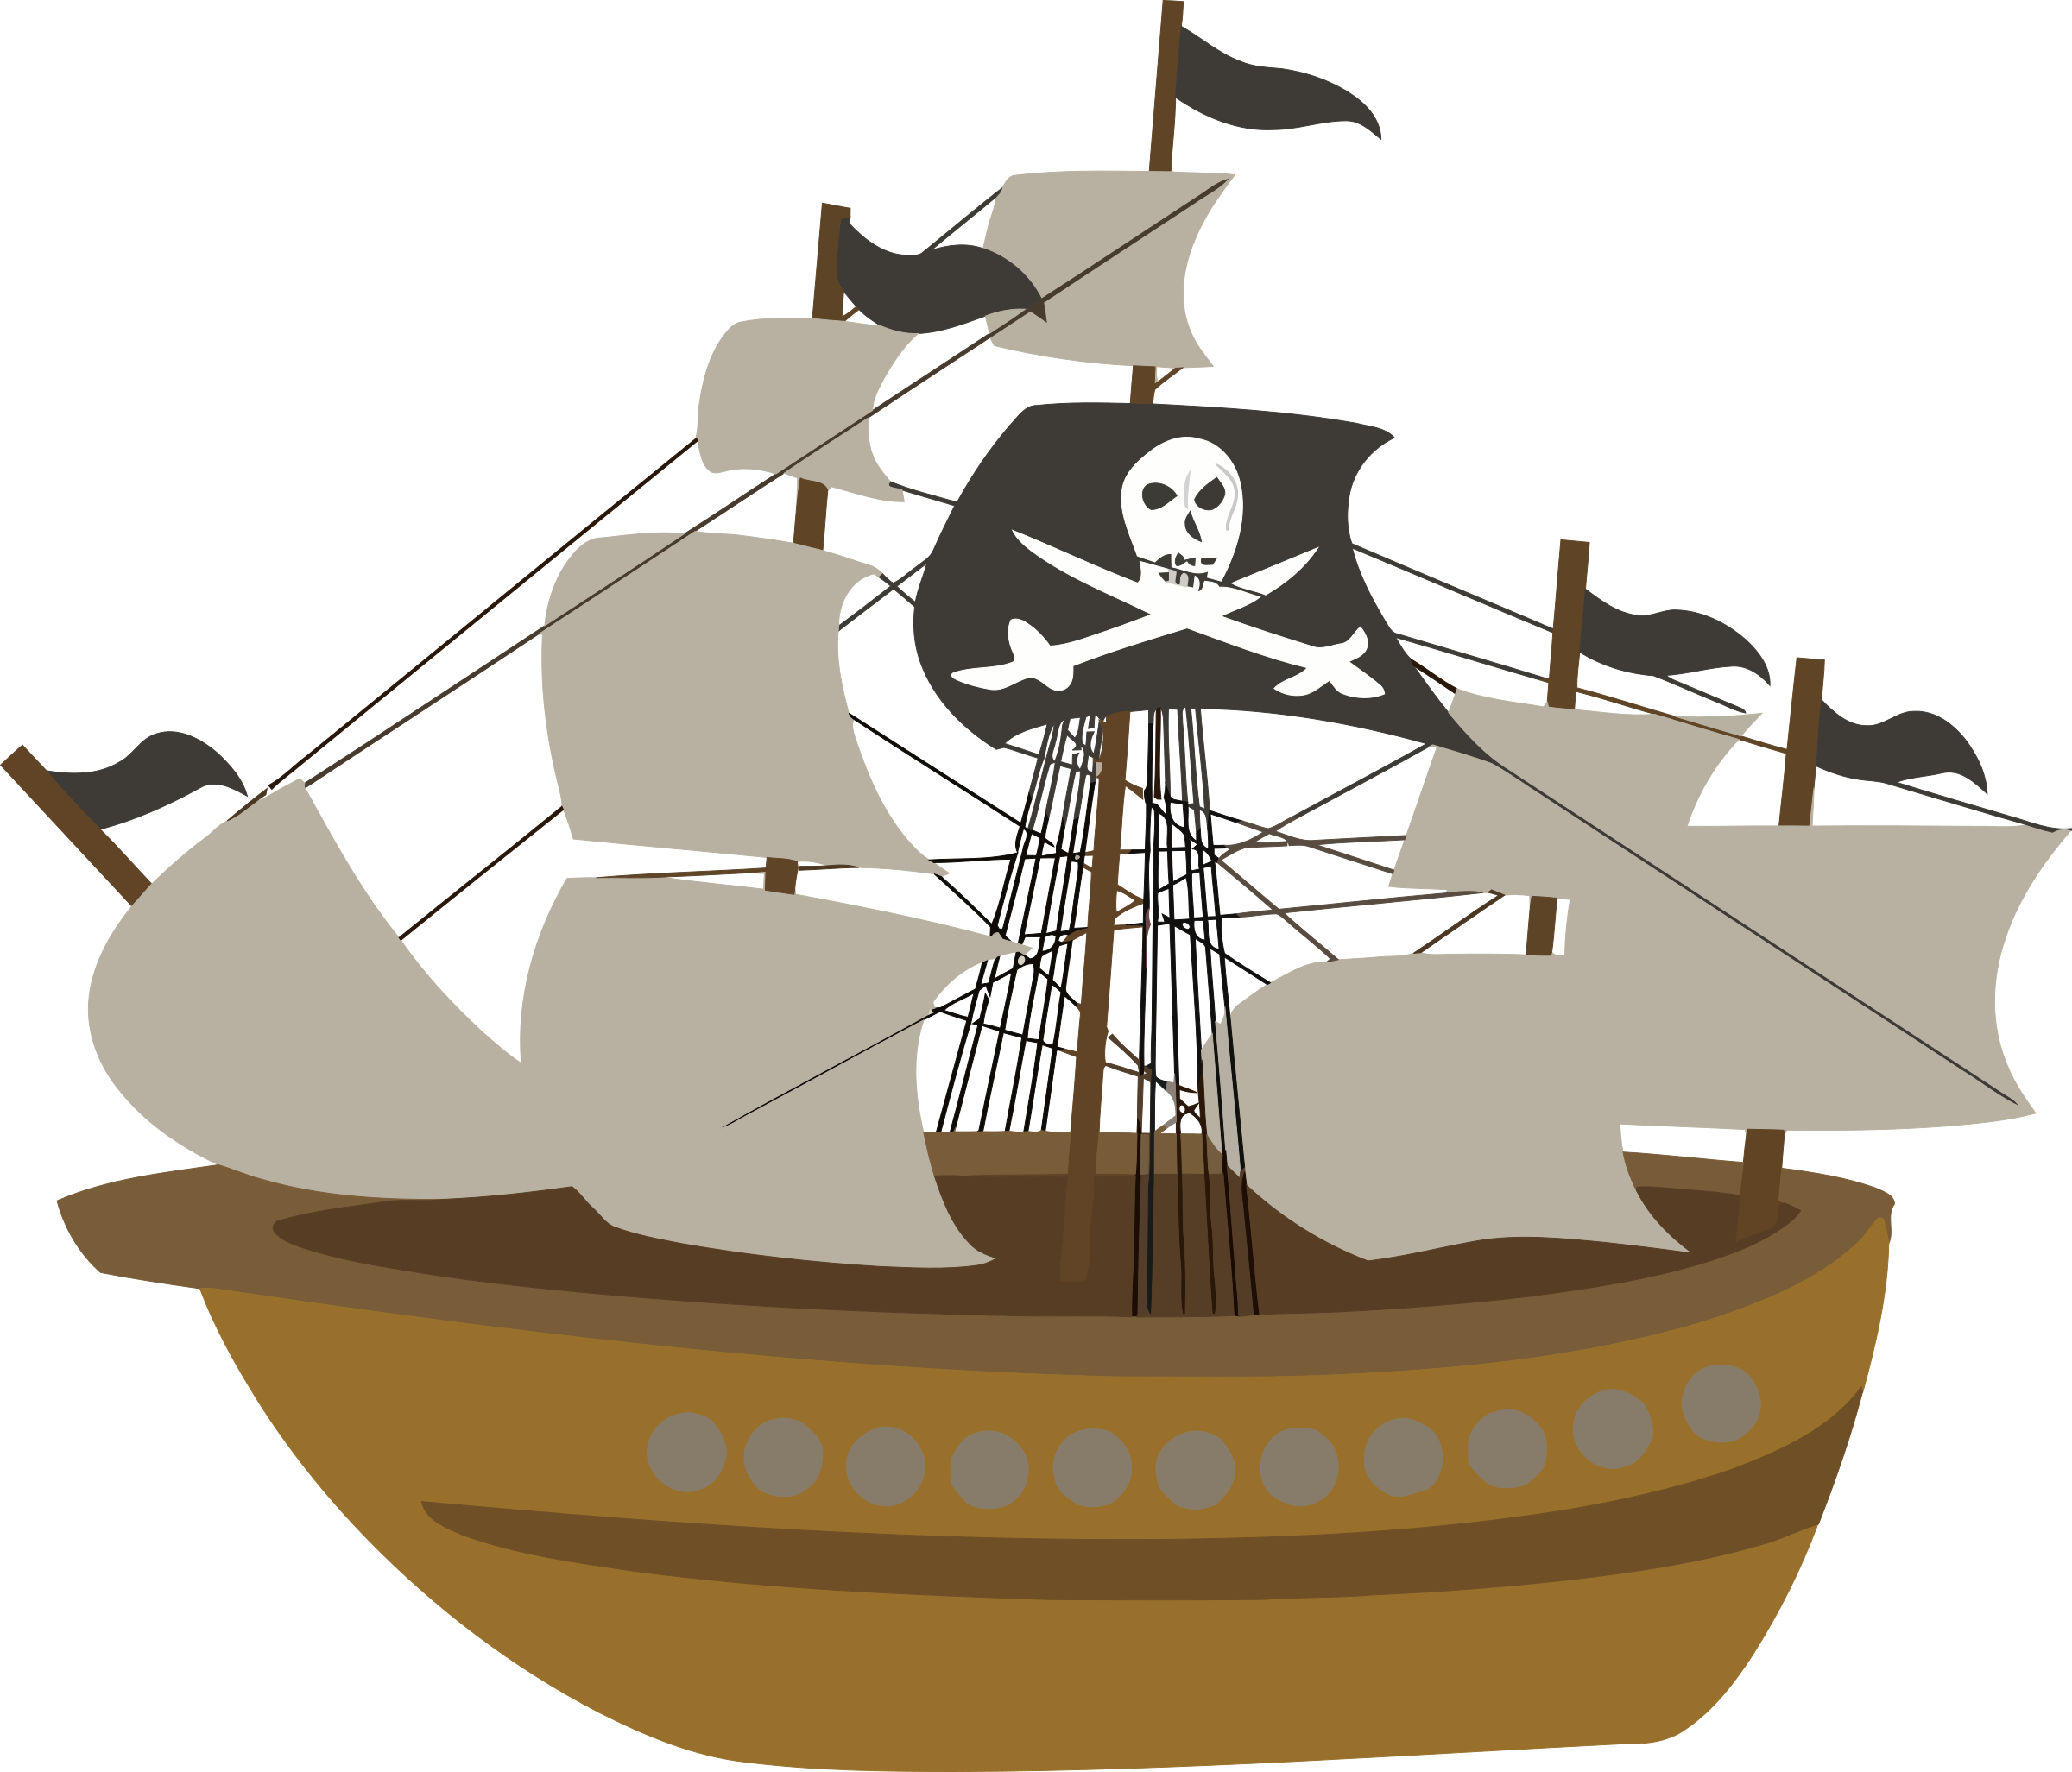 Pirates clipart boat, Pirates boat Transparent FREE for